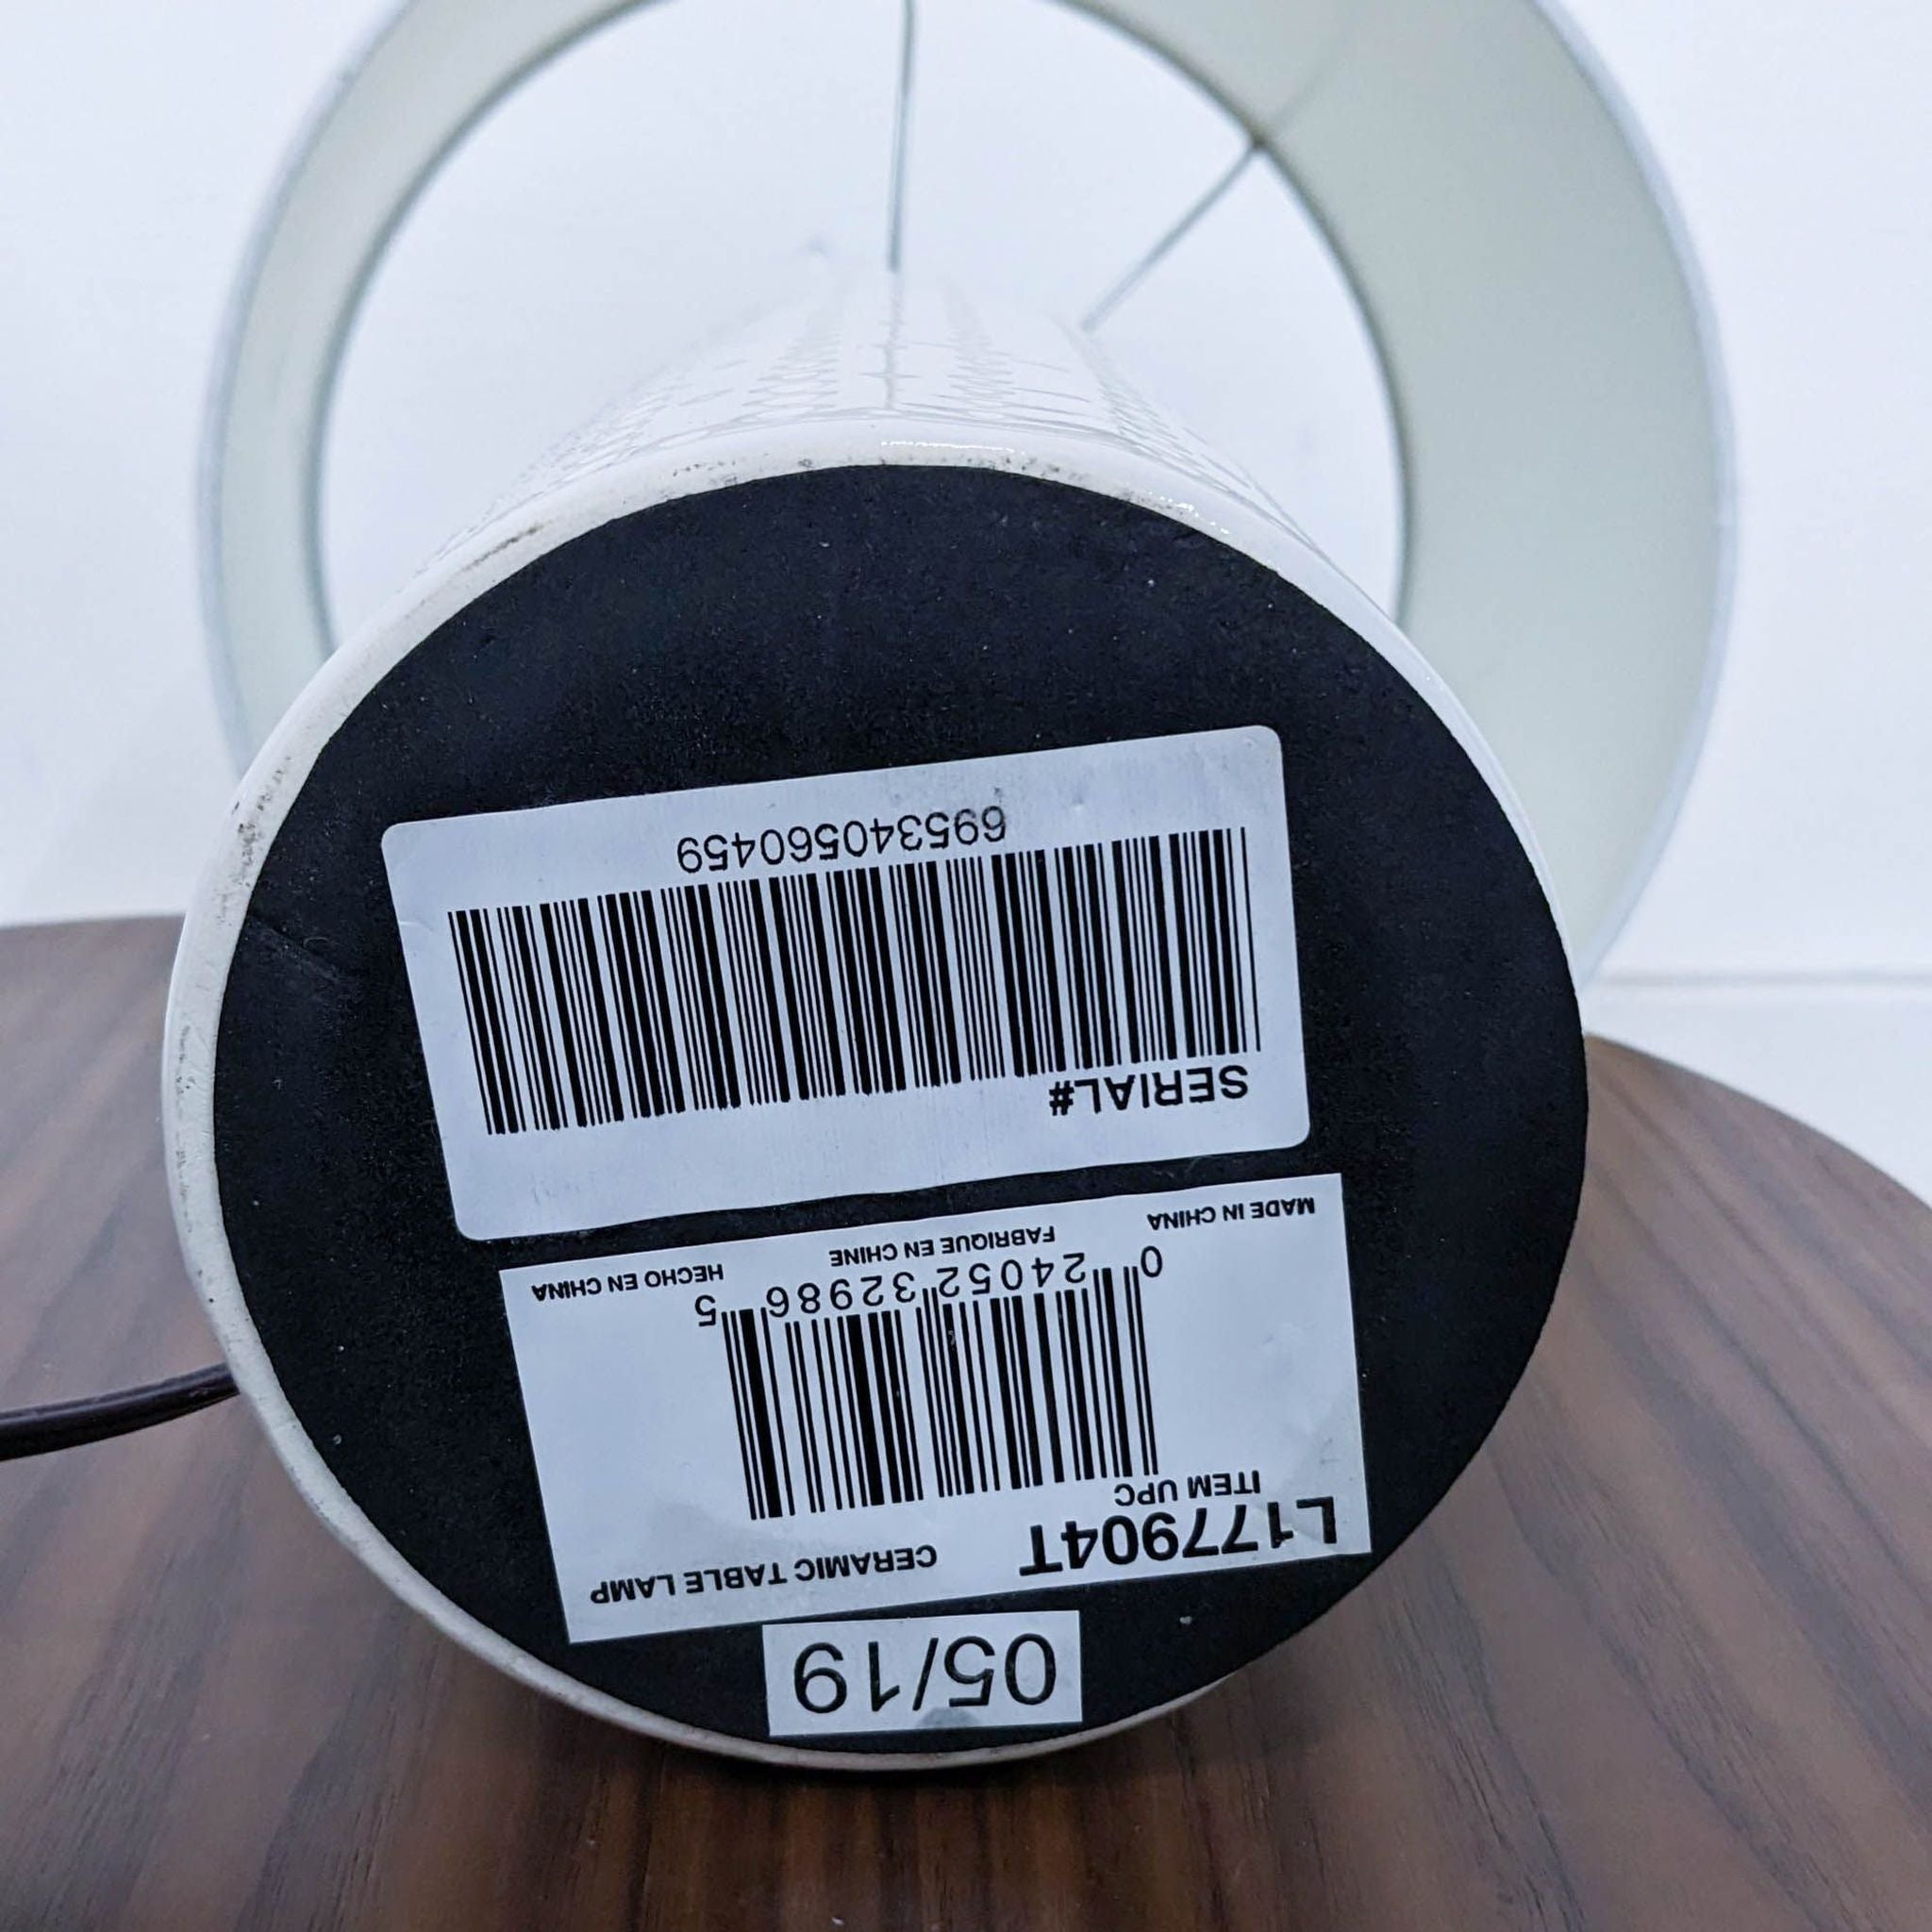 Close-up of a Reperch brand lighting product's base with a barcode and label on a reflective surface.